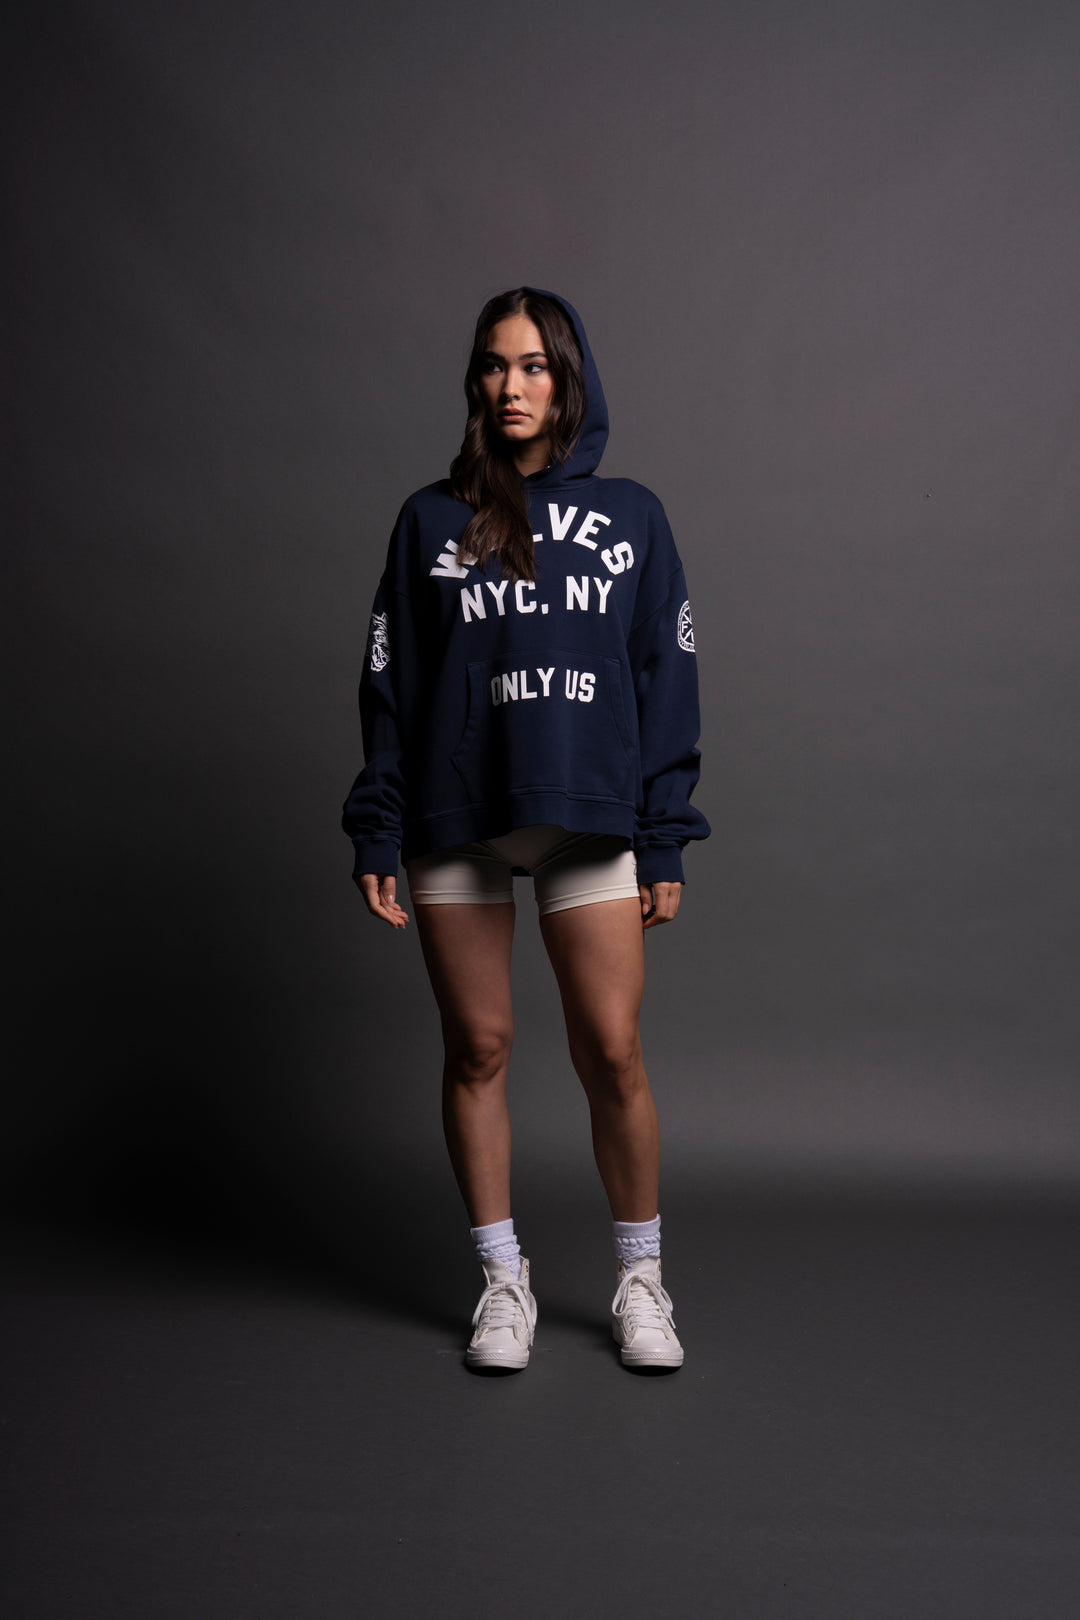 NY Wolves League "Box Cut" Hoodie in Navy